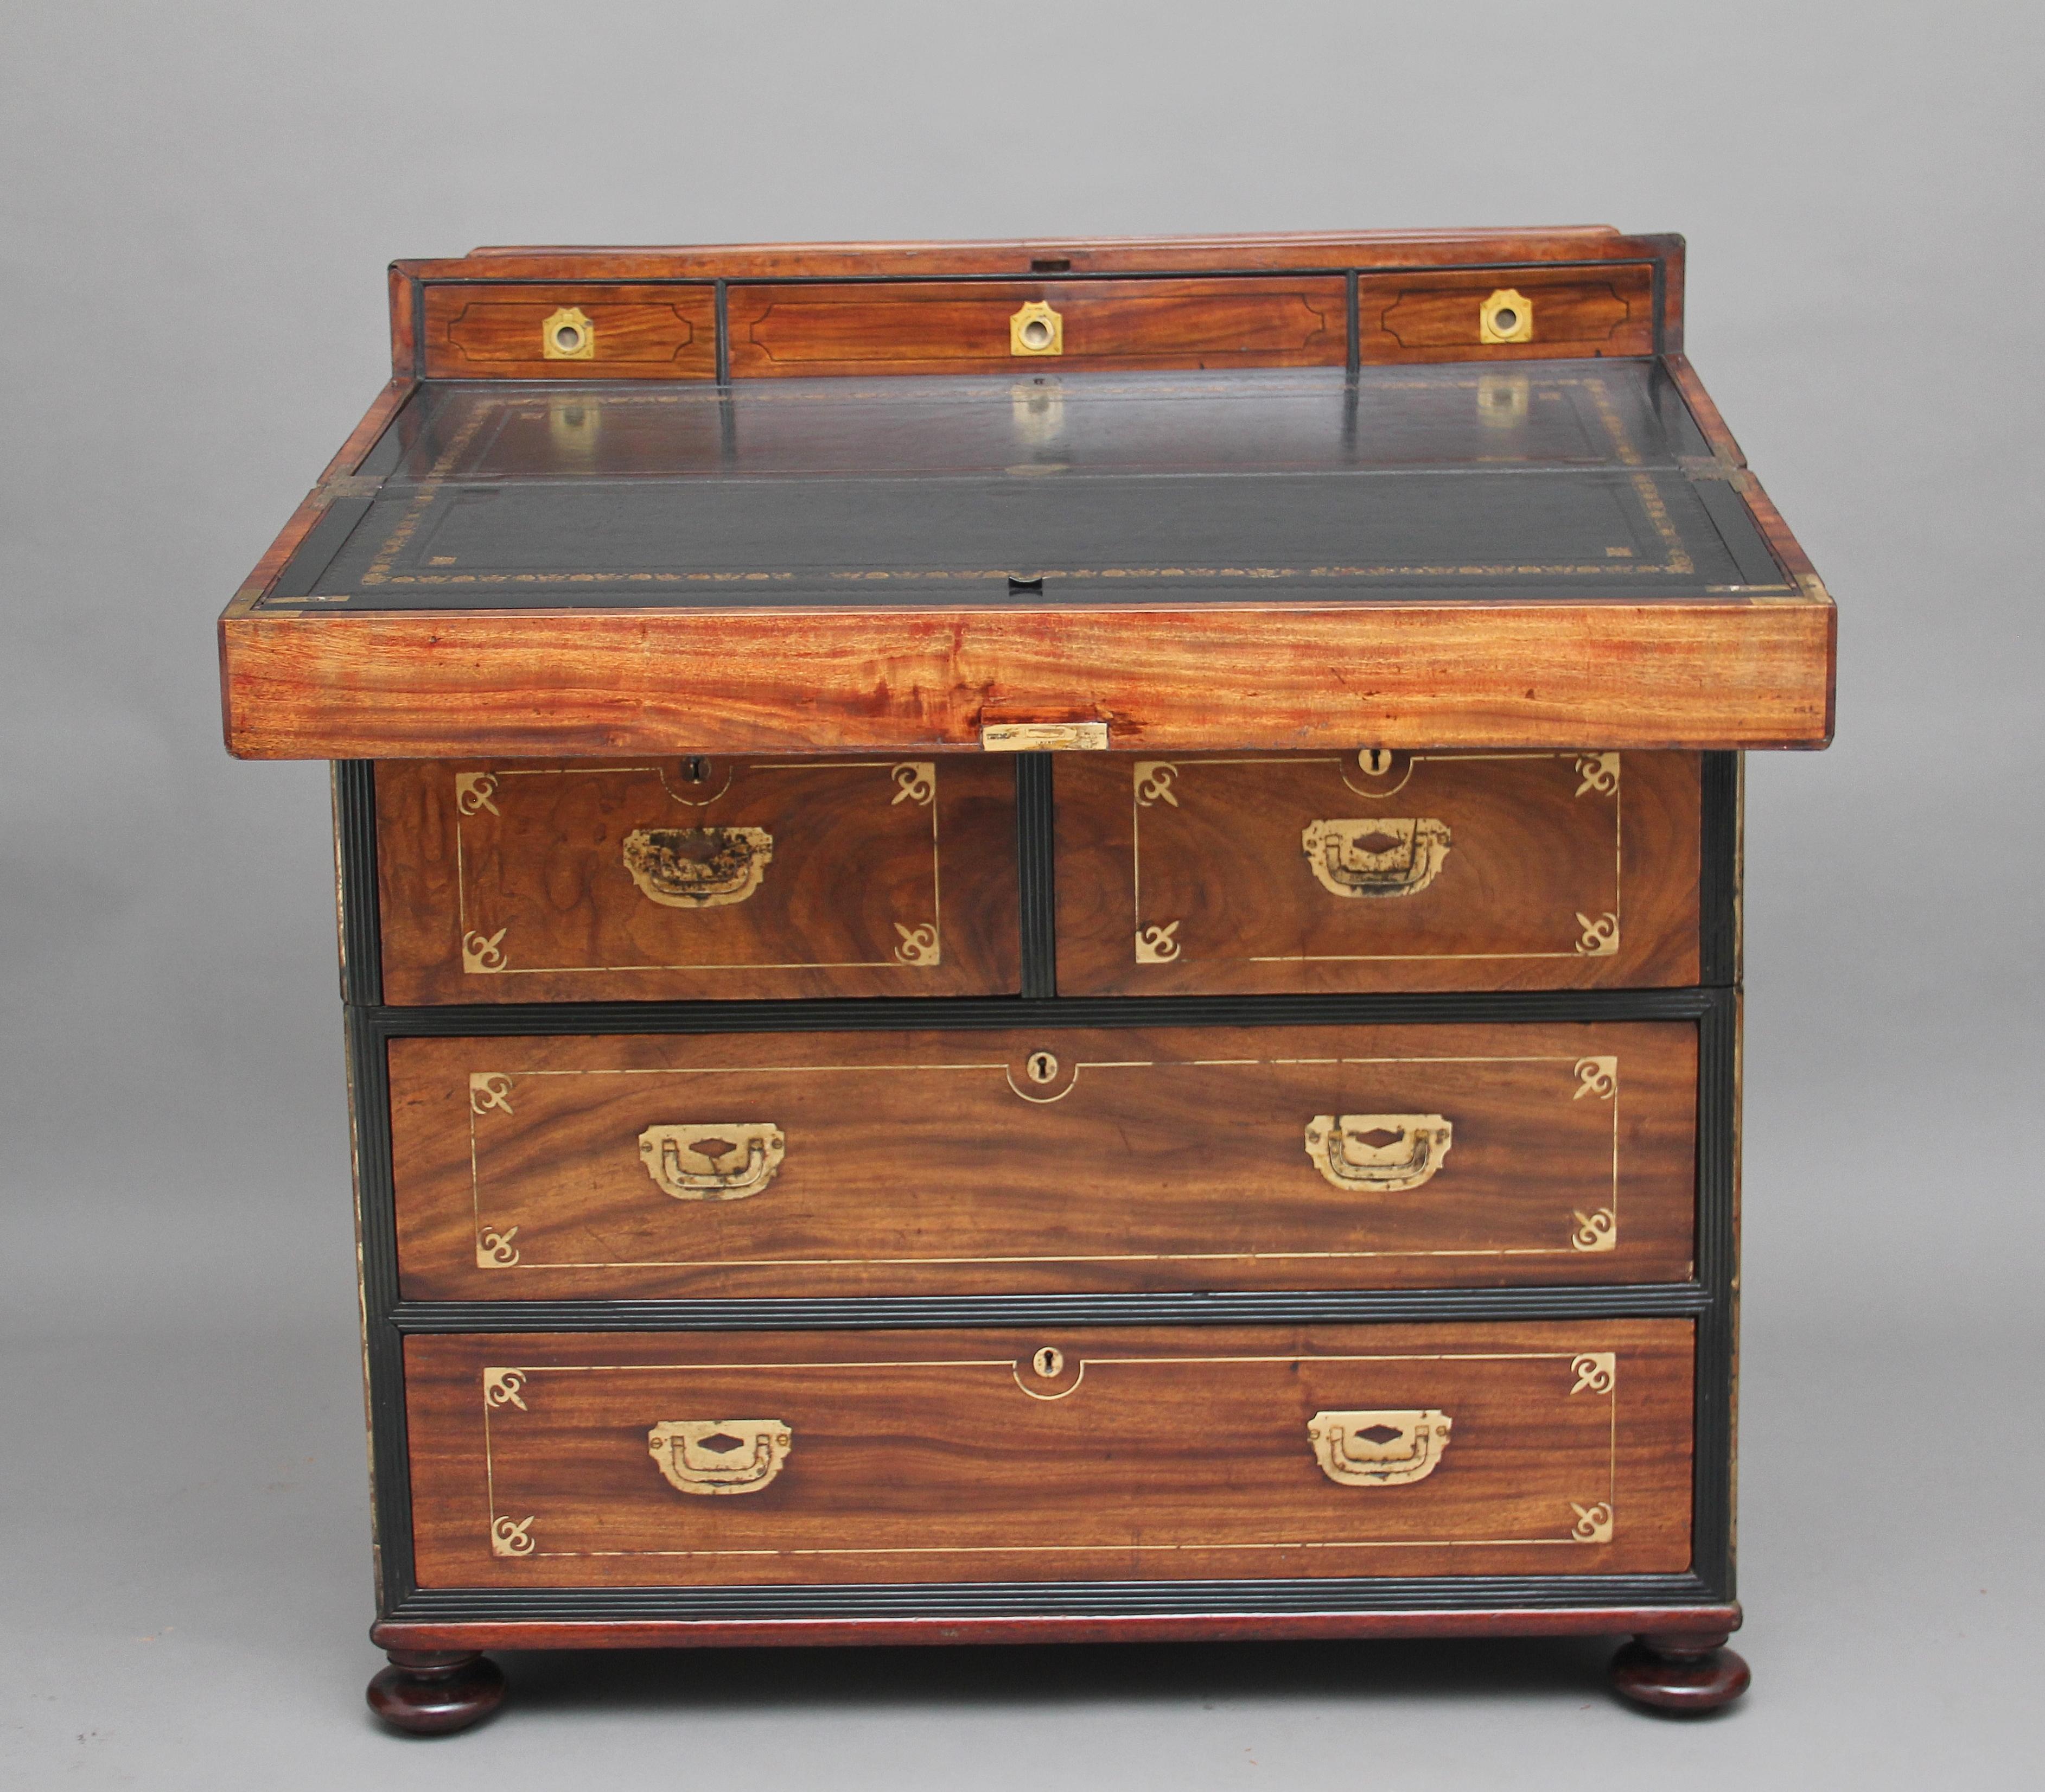 An extremely rare 19th century Anglo colonial padouk and brass inlaid desk or chest, the top folds over to reveal and black leather inset writing surface with gilt and blind tooled decoration, with three ebony inlaid drawers with brass handles, when